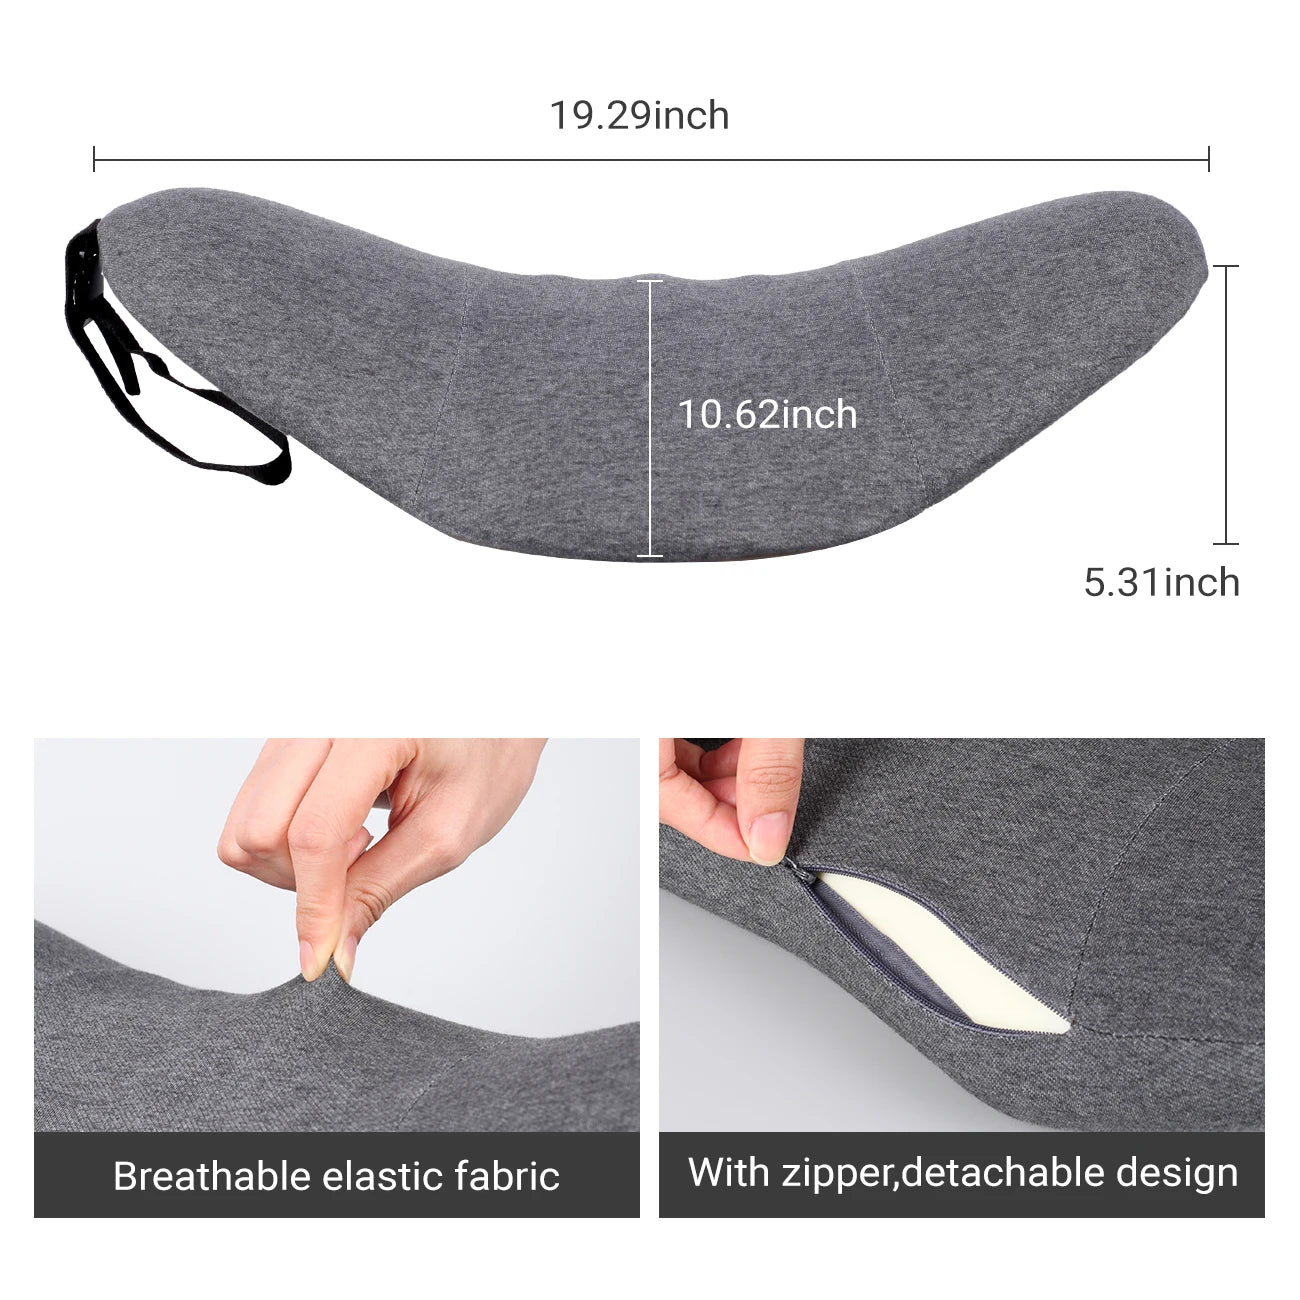 Leg Support Pillow Sciatica Body Joint Pain Relief Orthopedic Knee Pads Memory Foam Seat Cushion Orthopedic Pillow Coccyx